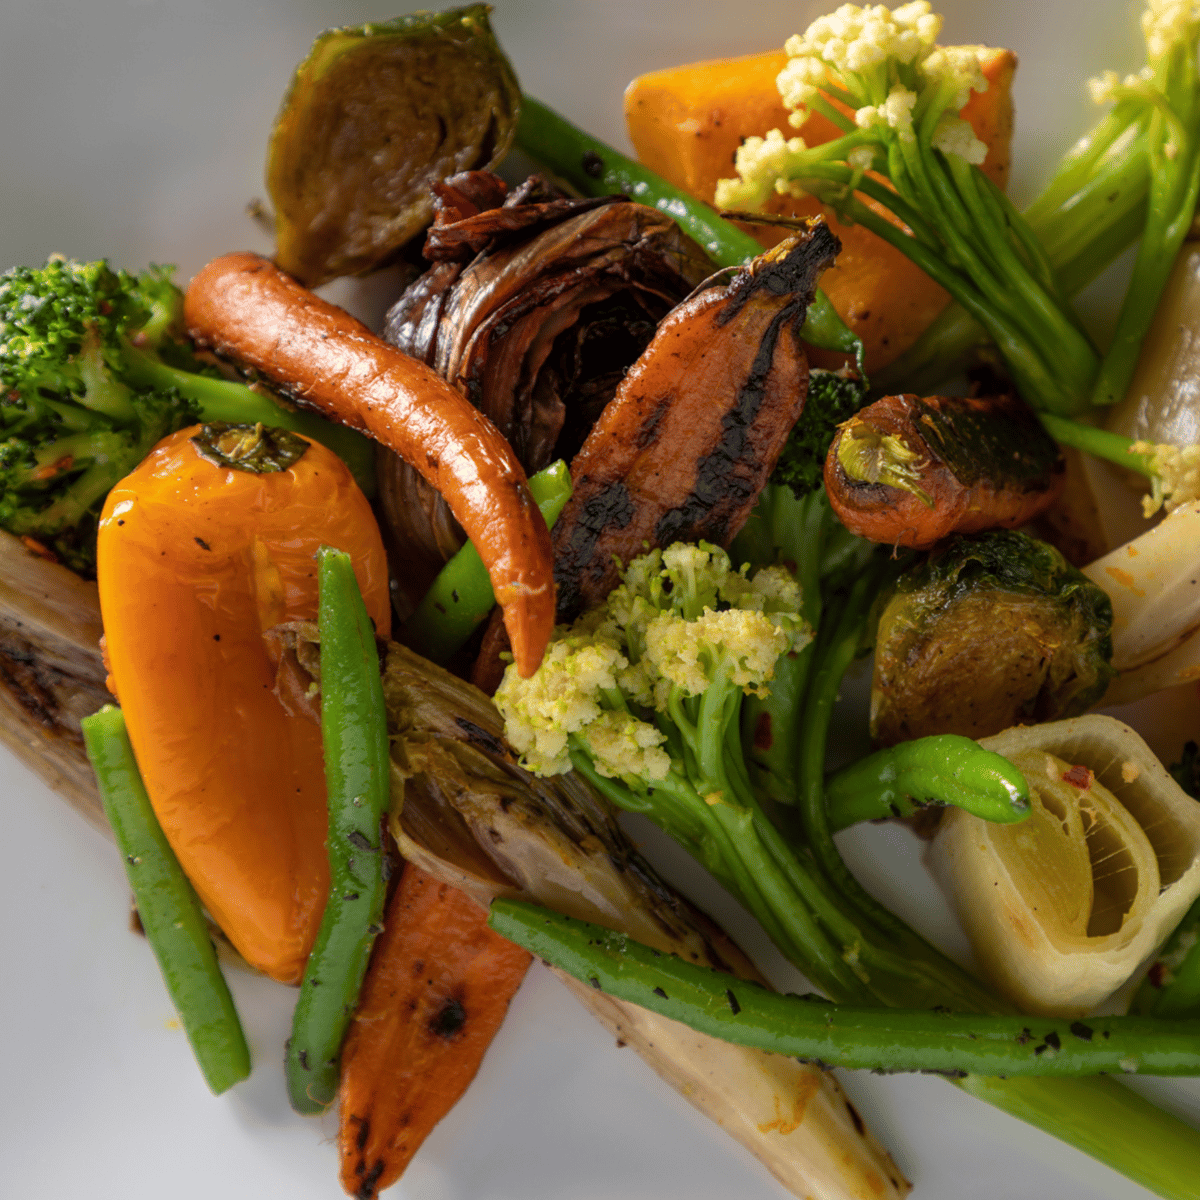 Sauteed carrots, brocoli and brussel sprouts